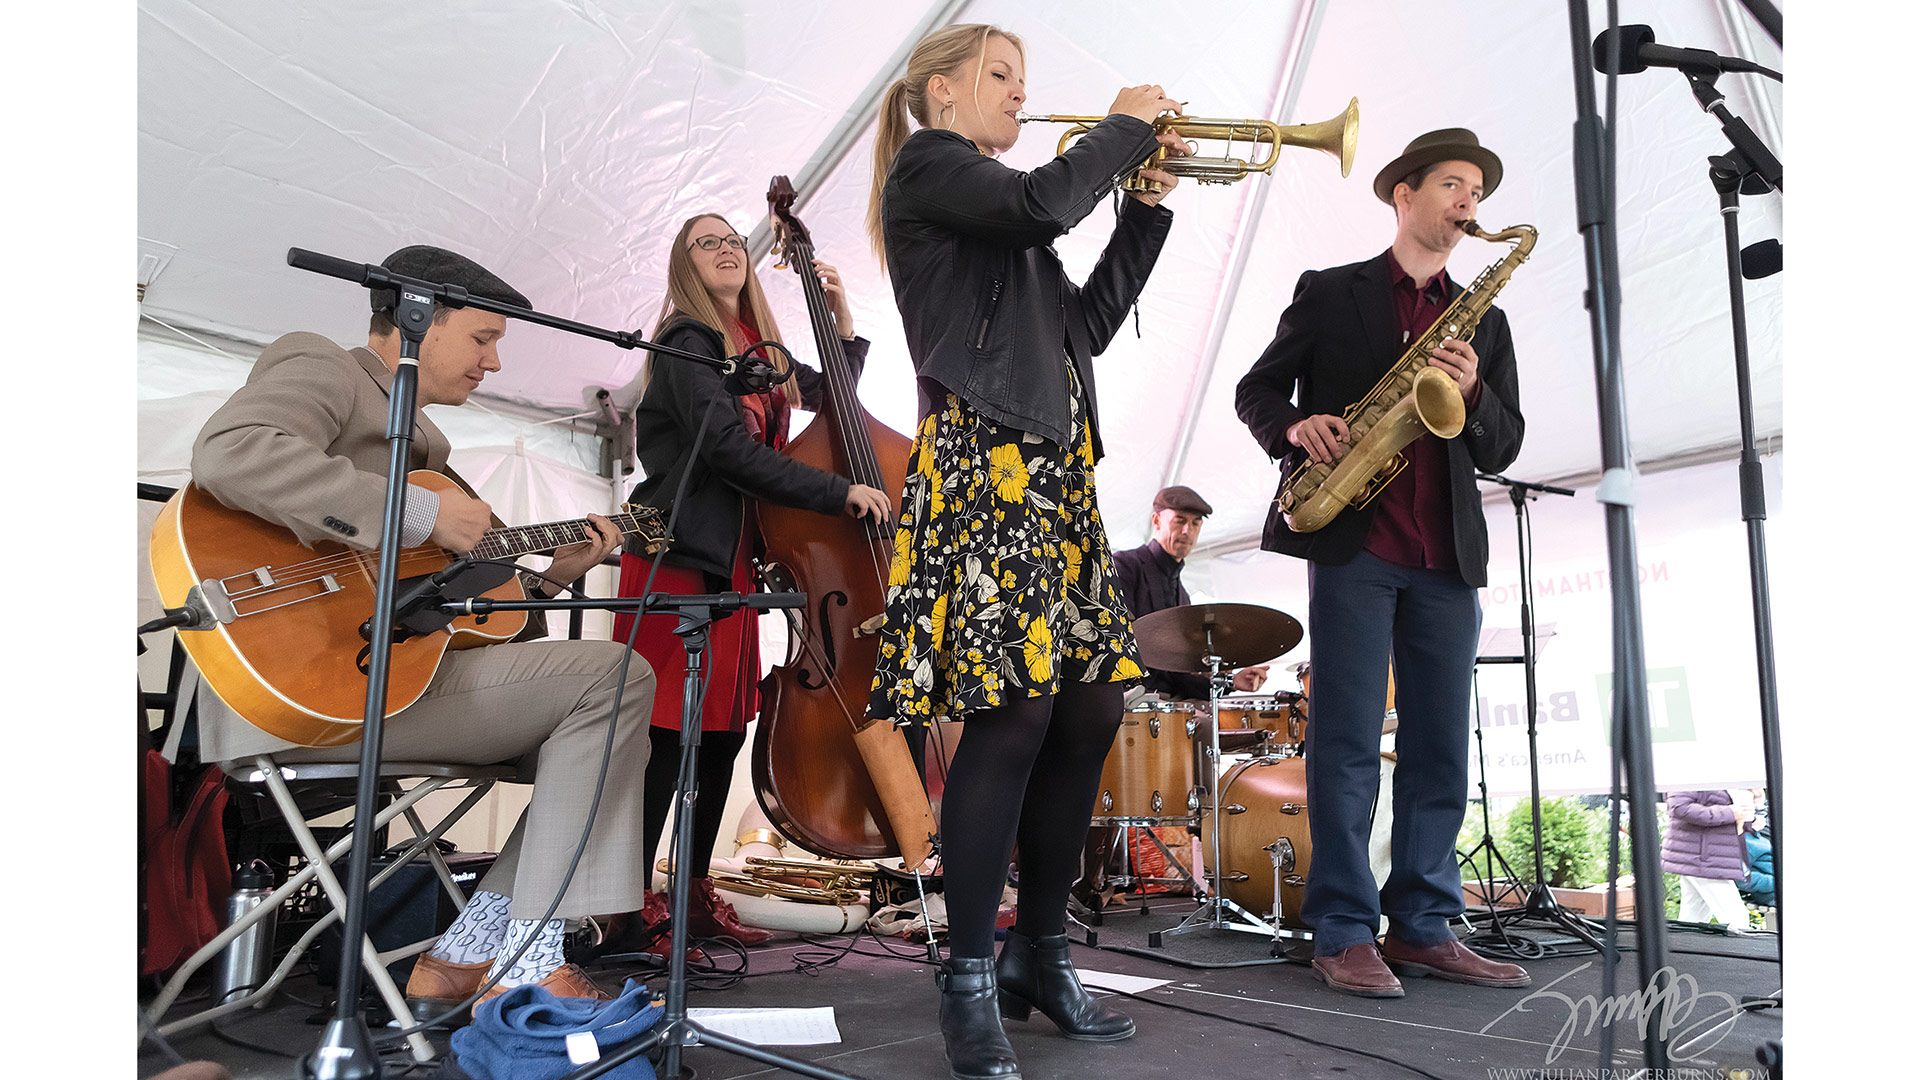 Eh La Bas, led by trumpeter Bria Skonberg, a quintet of Canadian-born musicians that came together exclusively for the Northampton Jazz Festival, close out the free daytime performances at Pulaski Park on Oct. 1;